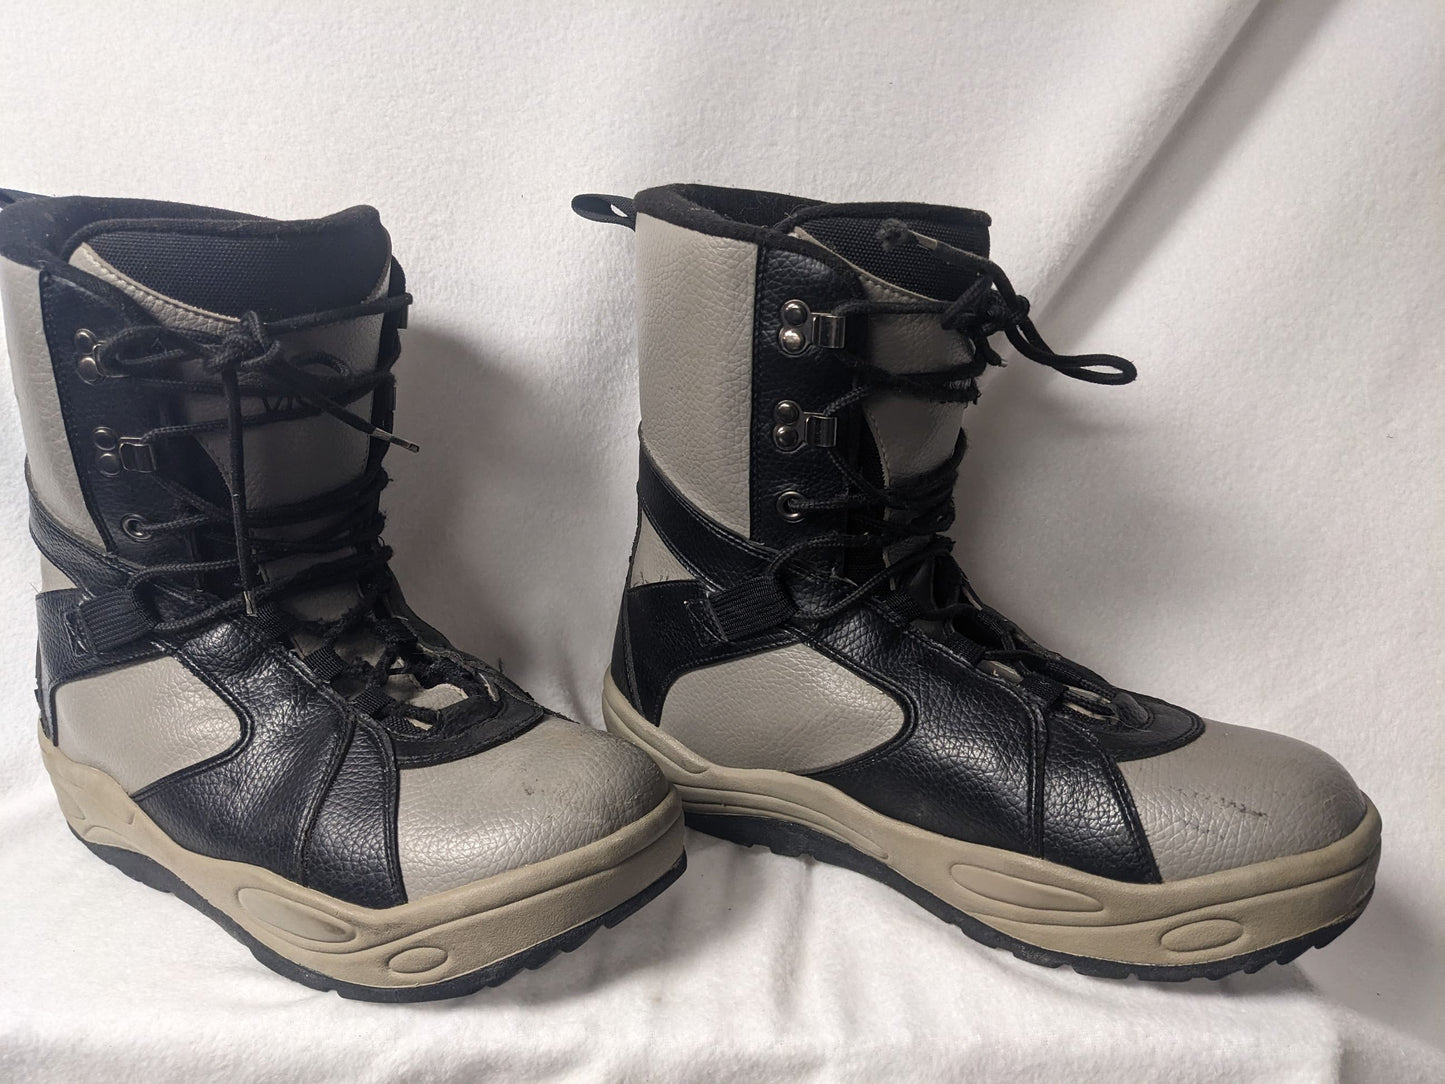 Vision Classic Snowboard Boots Size 11 Color Gray Condition Used